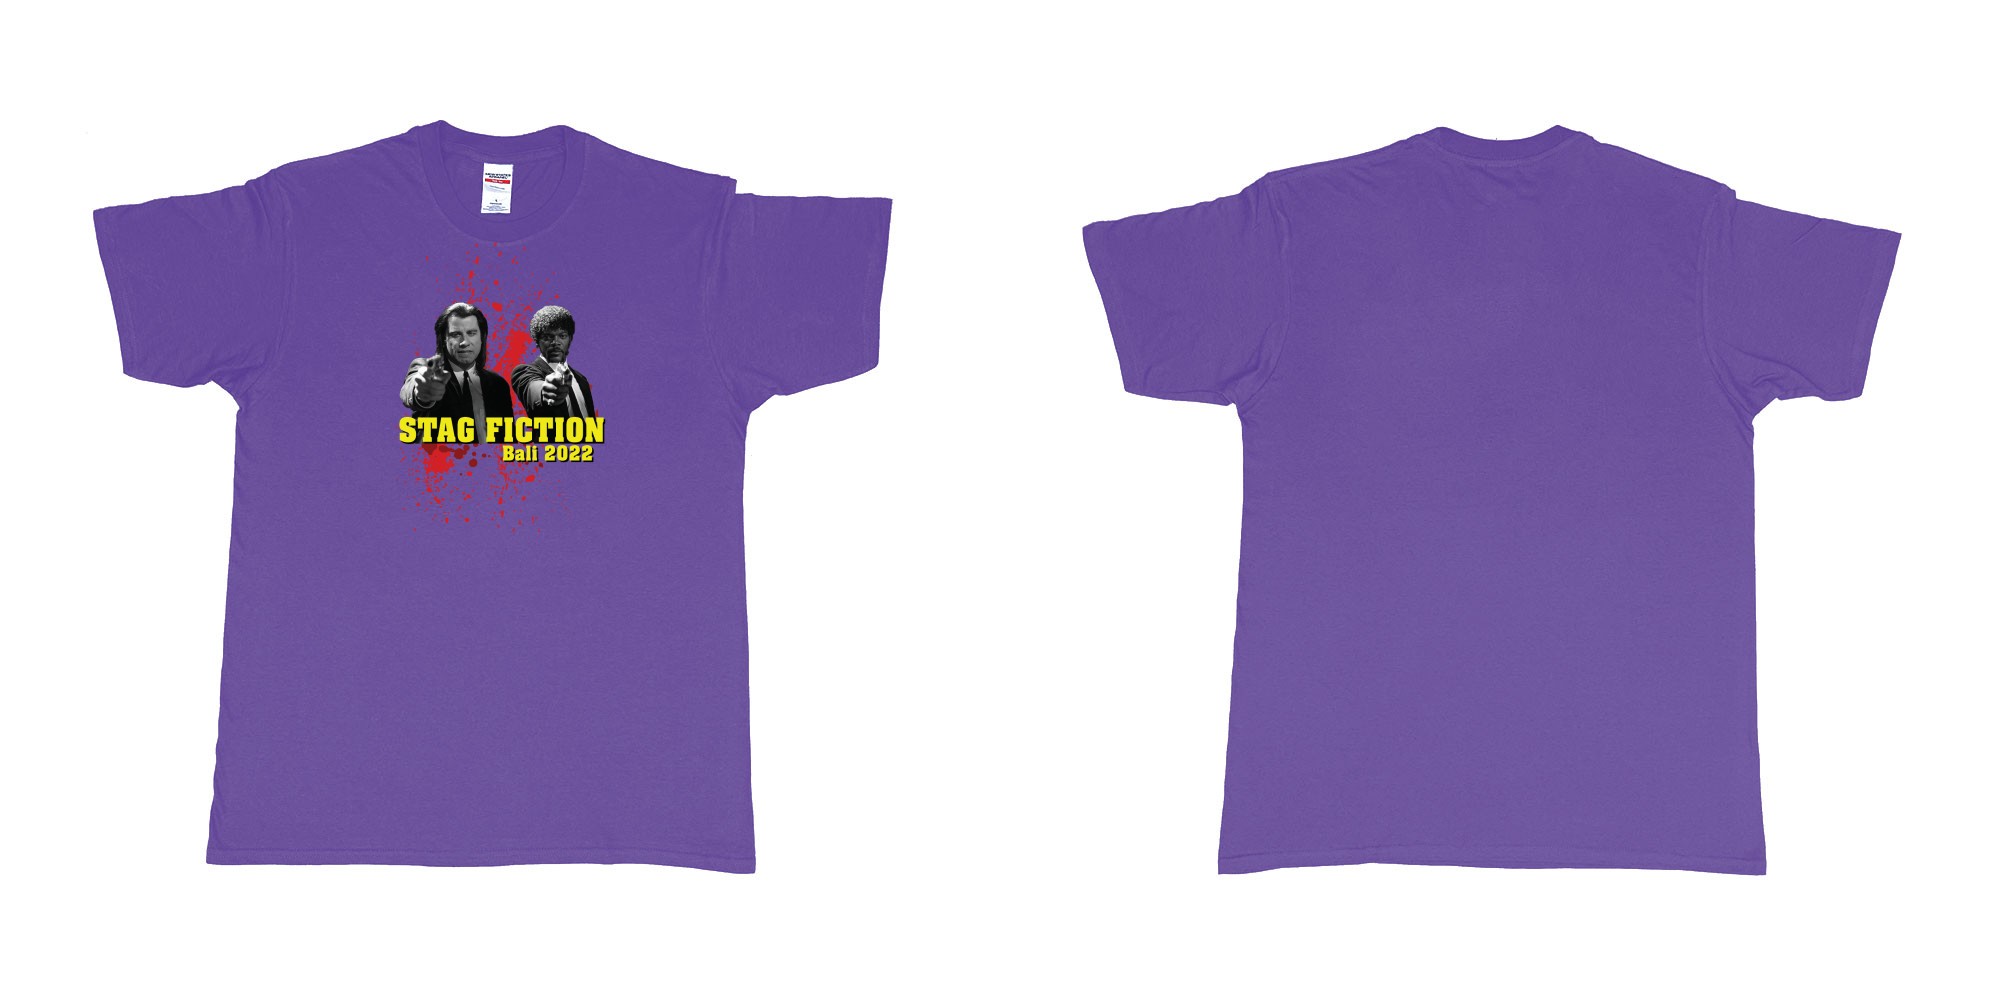 Custom tshirt design pulp fiction blood in fabric color purple choice your own text made in Bali by The Pirate Way